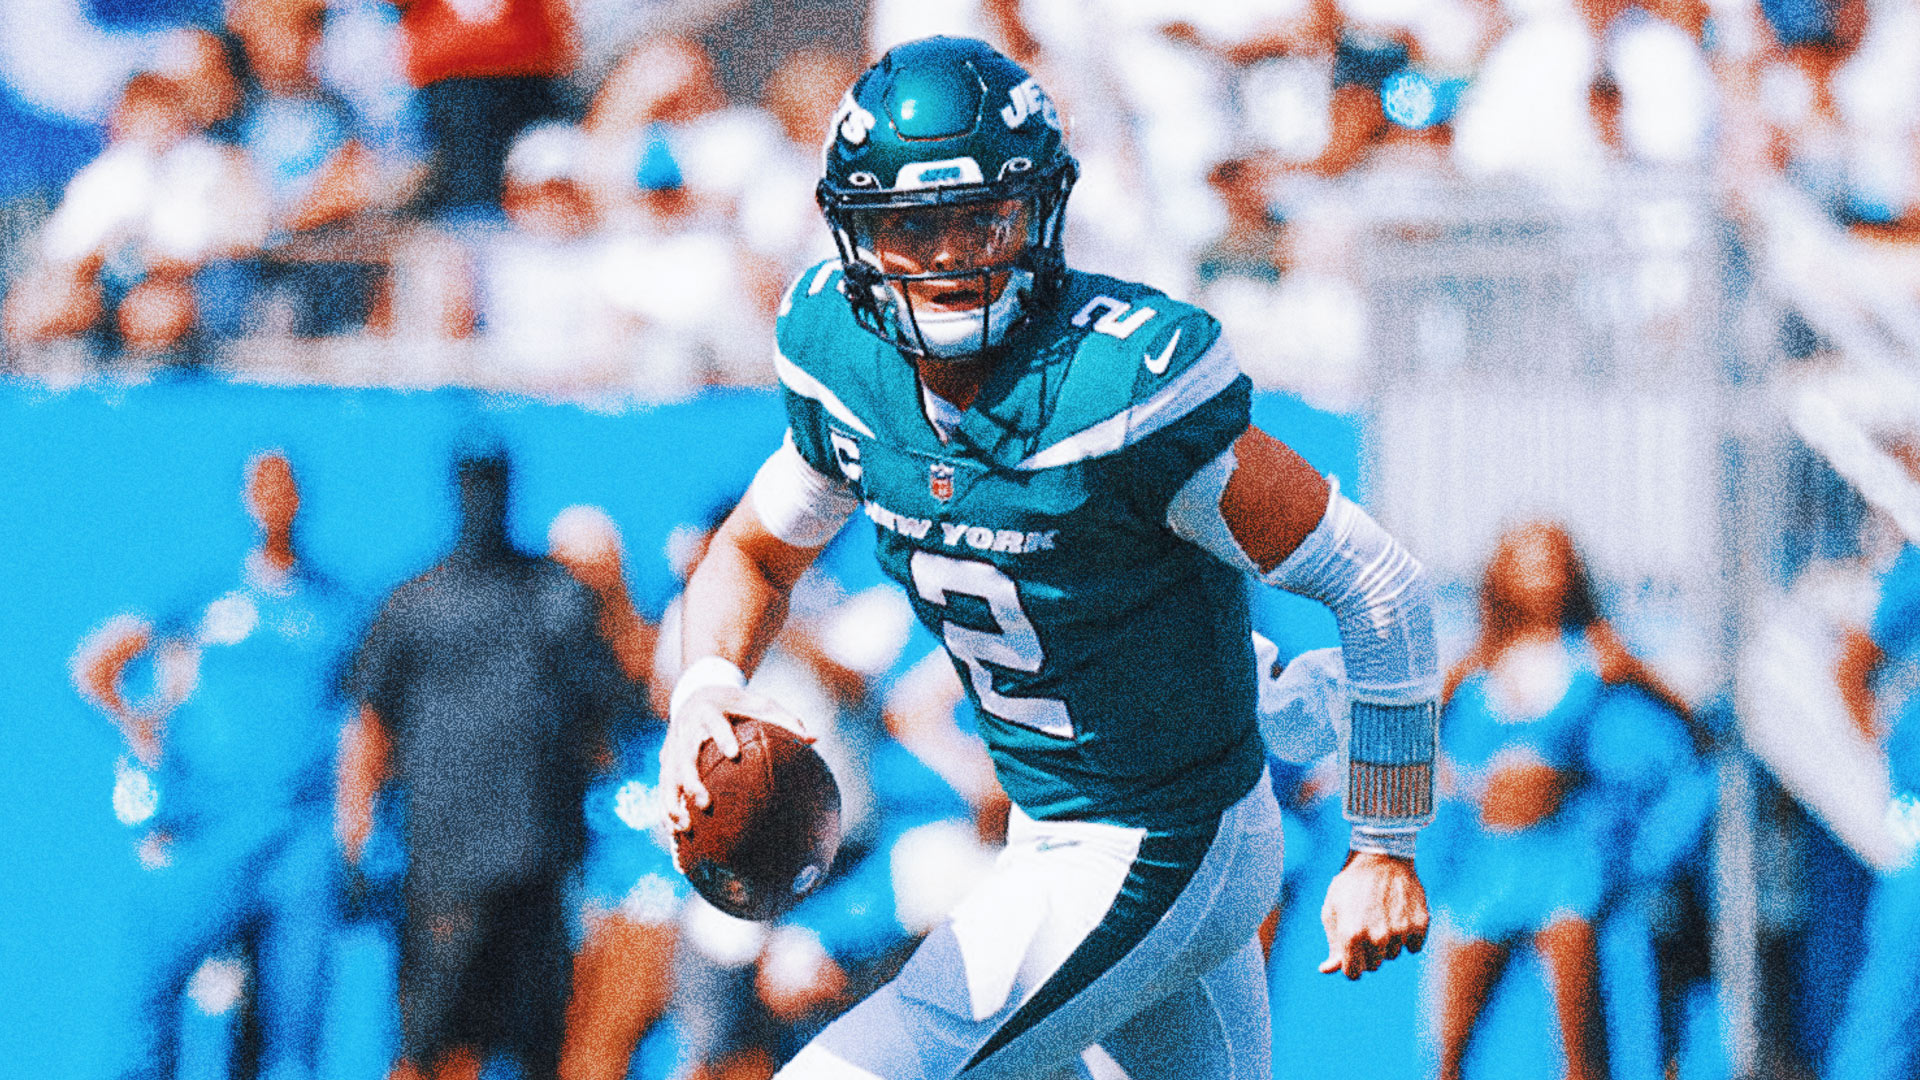 Jets QB Zach Wilson needs to cease and desist his Patrick Mahomes impression